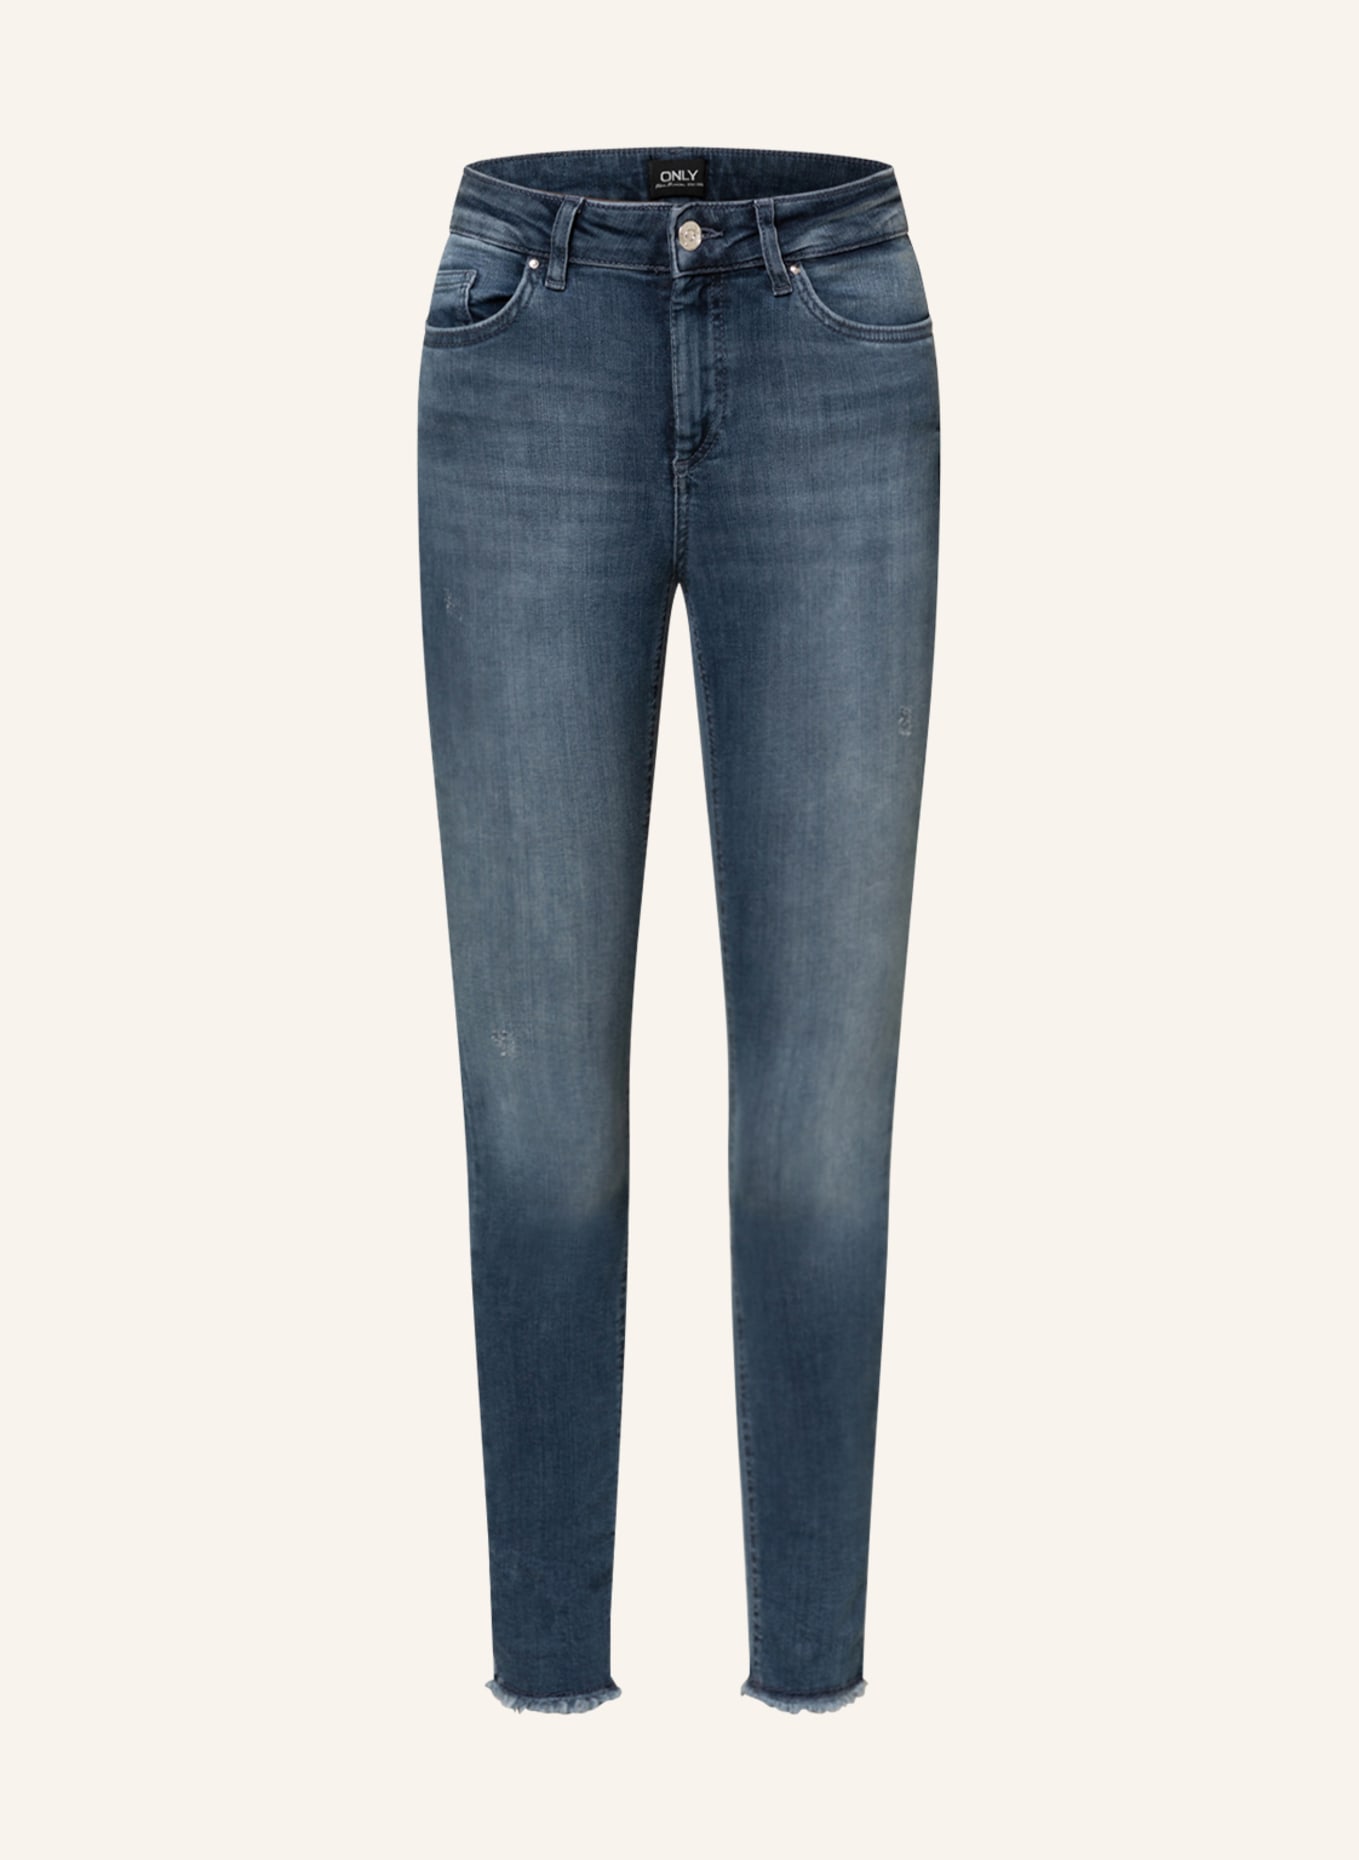 ONLY Skinny Jeans, Farbe: Special Blue Denim(Bild null)